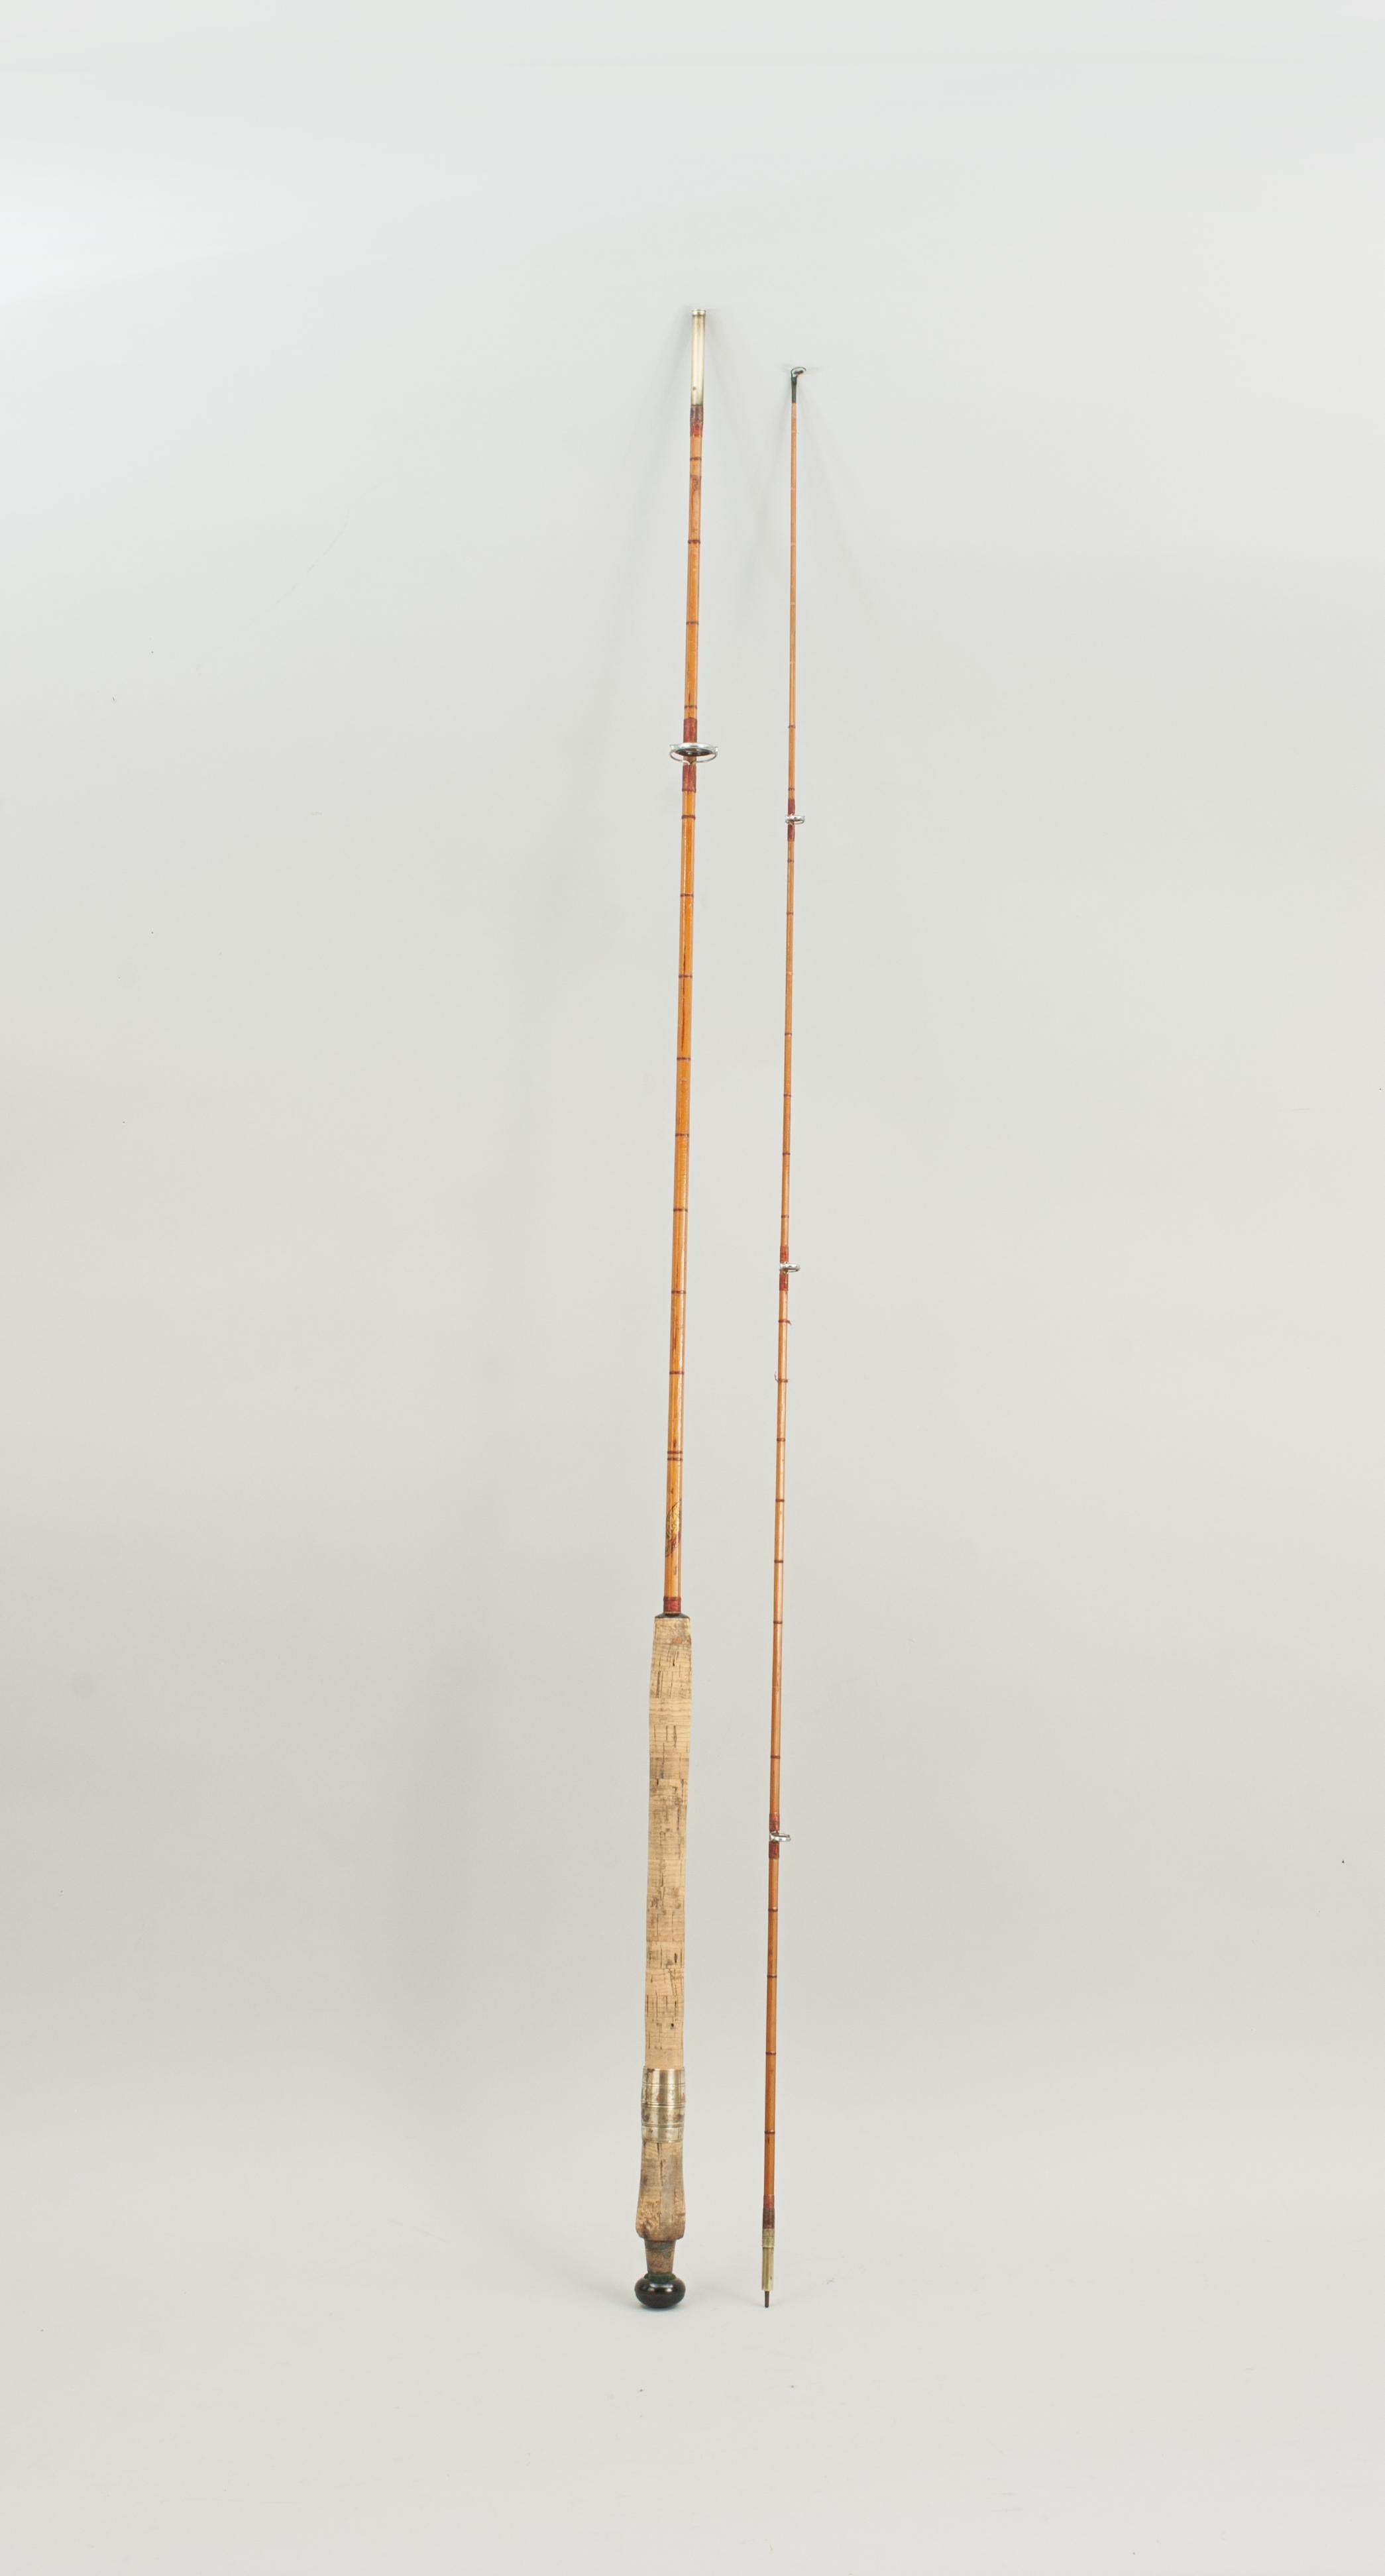 Allcock Hughes-Parry Spinning Rod.
The Allcock Hughes-Parry 8' 10